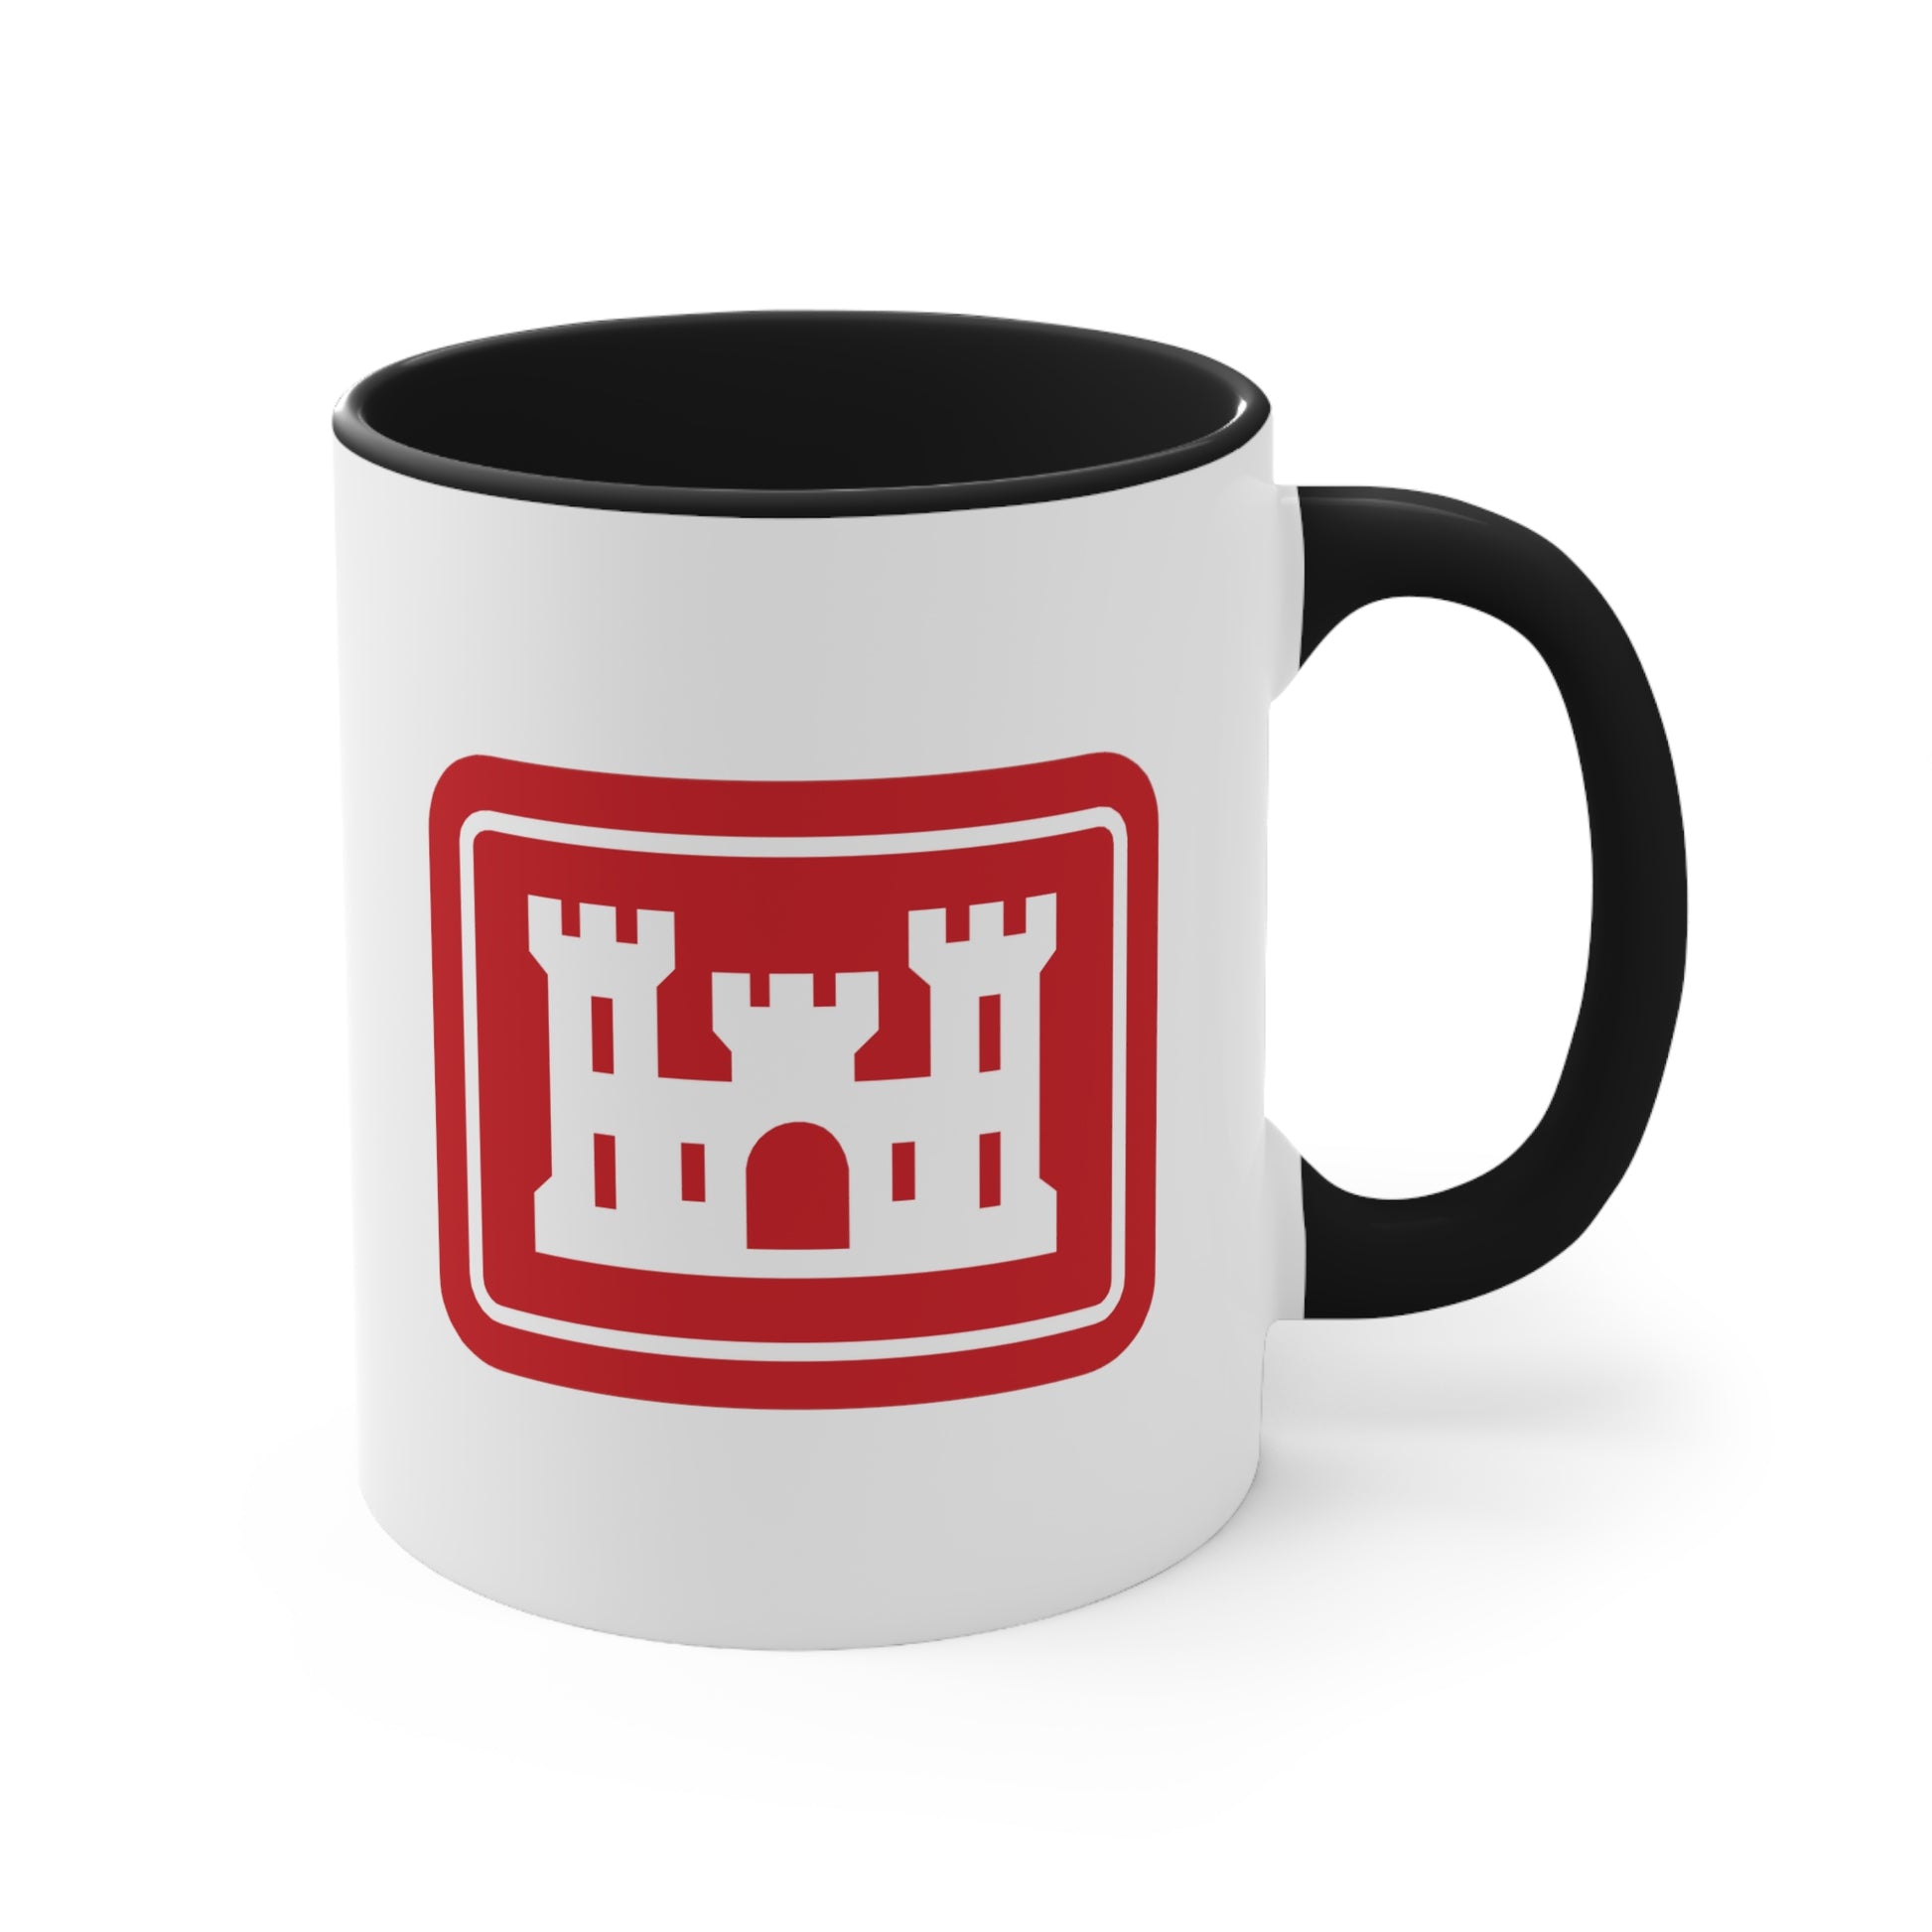 US Army Corps of Engineers Coffee Mug - Double Sided Black Accent Ceramic 11oz - by TheGlassyLass